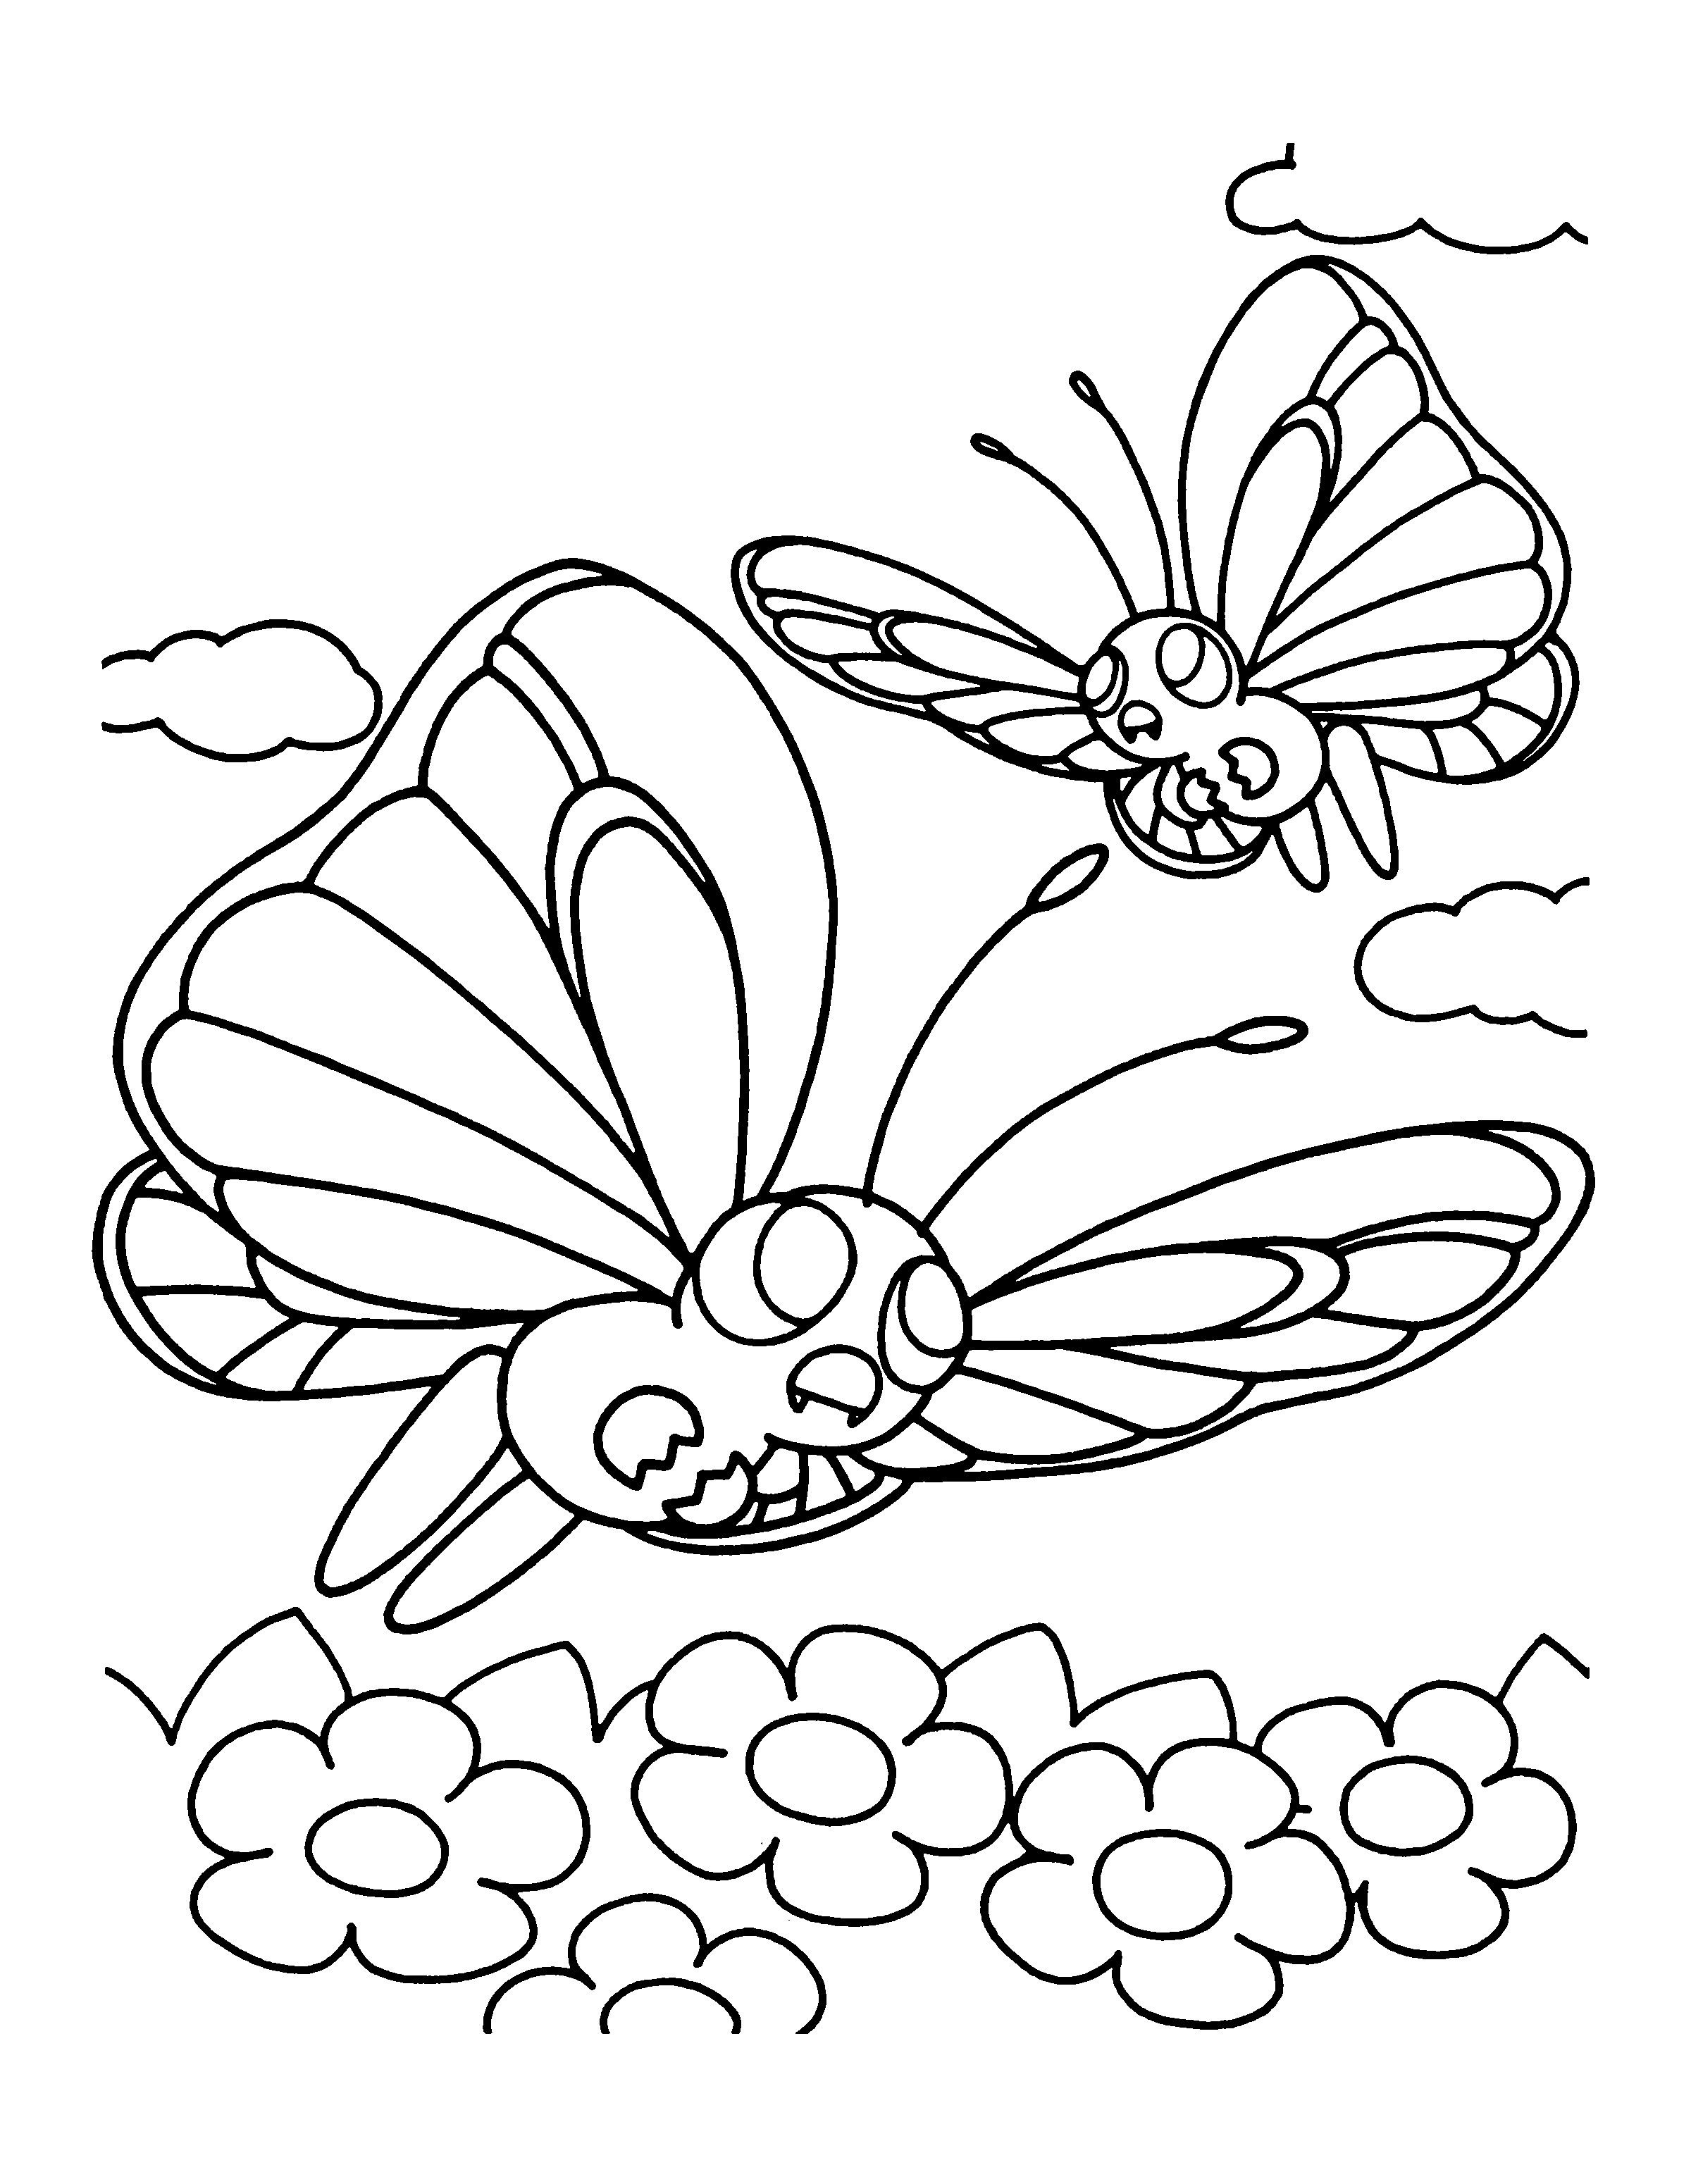 Butterfree Pokemon Coloring Page (Page 1) - Line.17QQ.com